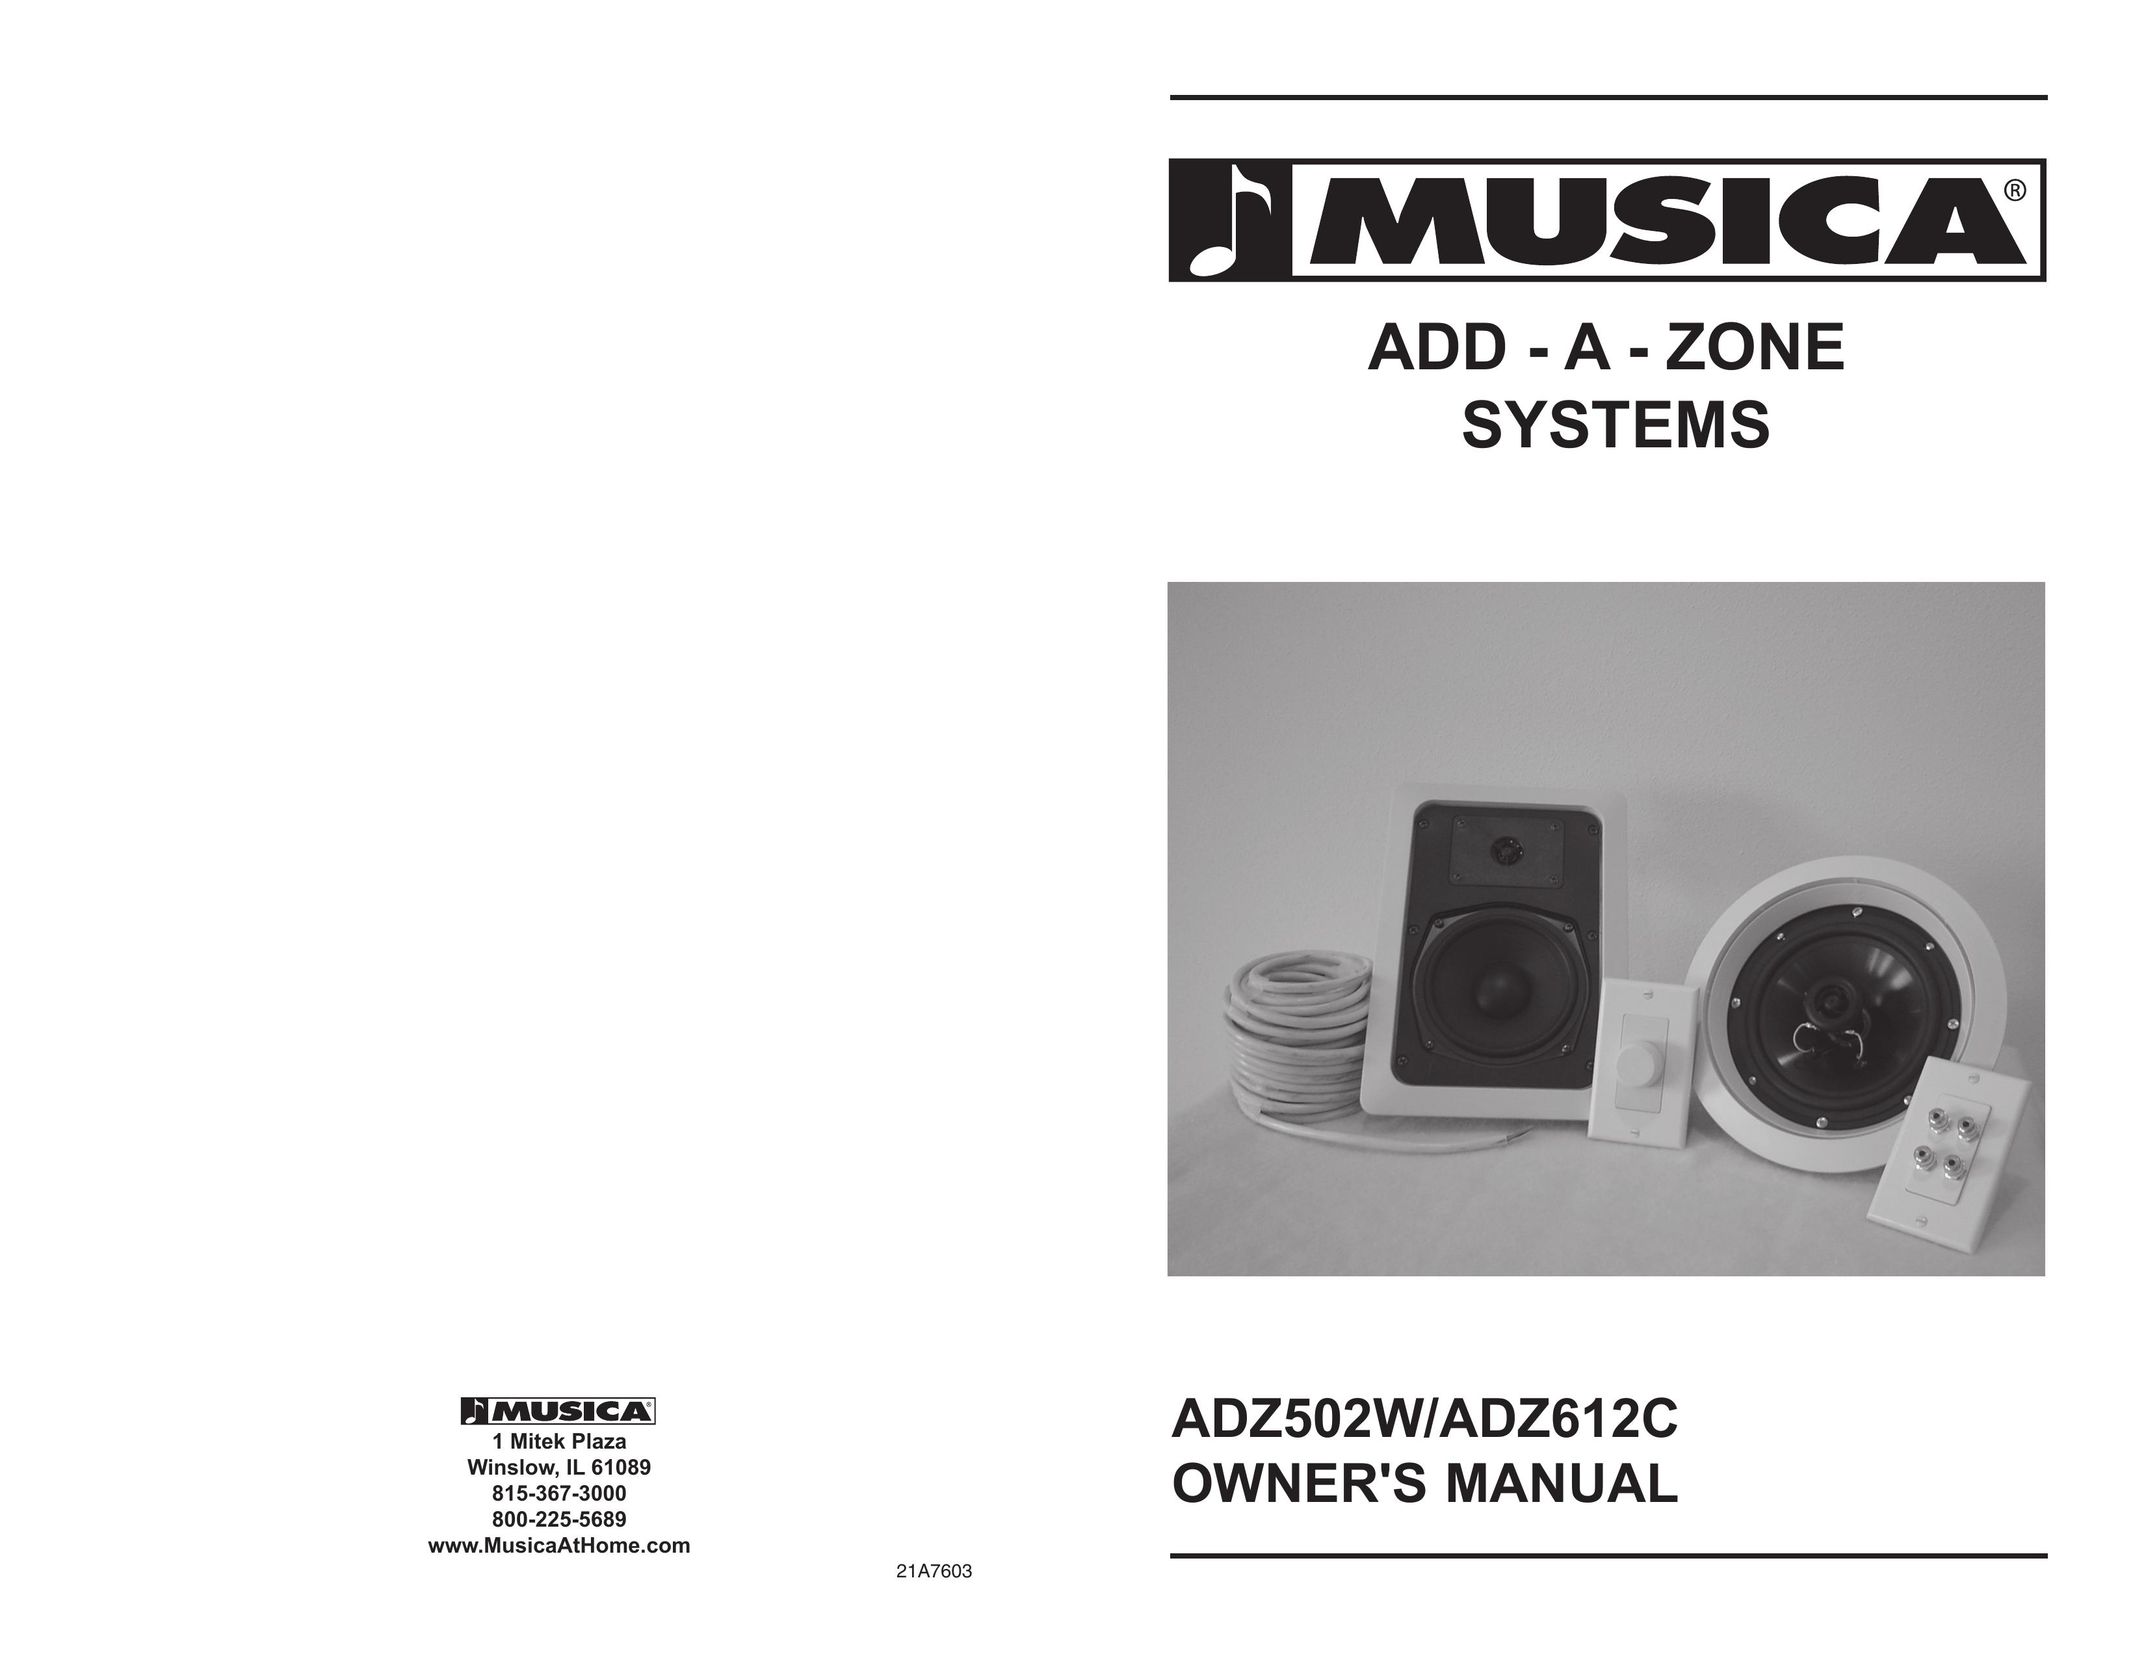 Musica ADD - A - ZONE SYSTEMS Speaker System User Manual